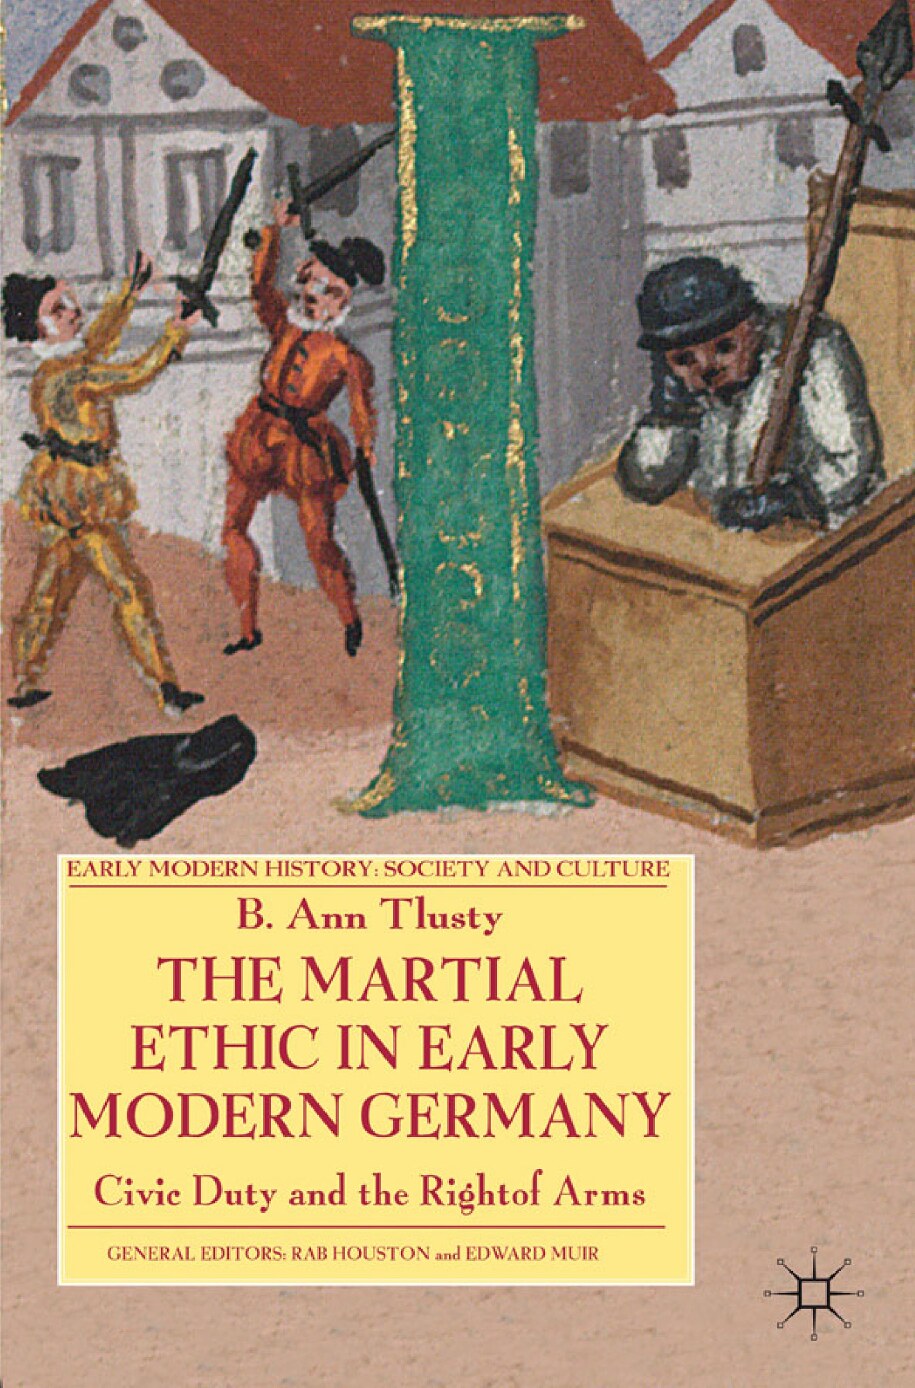 [Early Modern History_ Society and Culture] B. Ann Tlusty (auth.) - The Martial Ethic in Early Modern Germany_ Civic Duty and the Right of Arms (2011, Palgrave Macmillan UK)